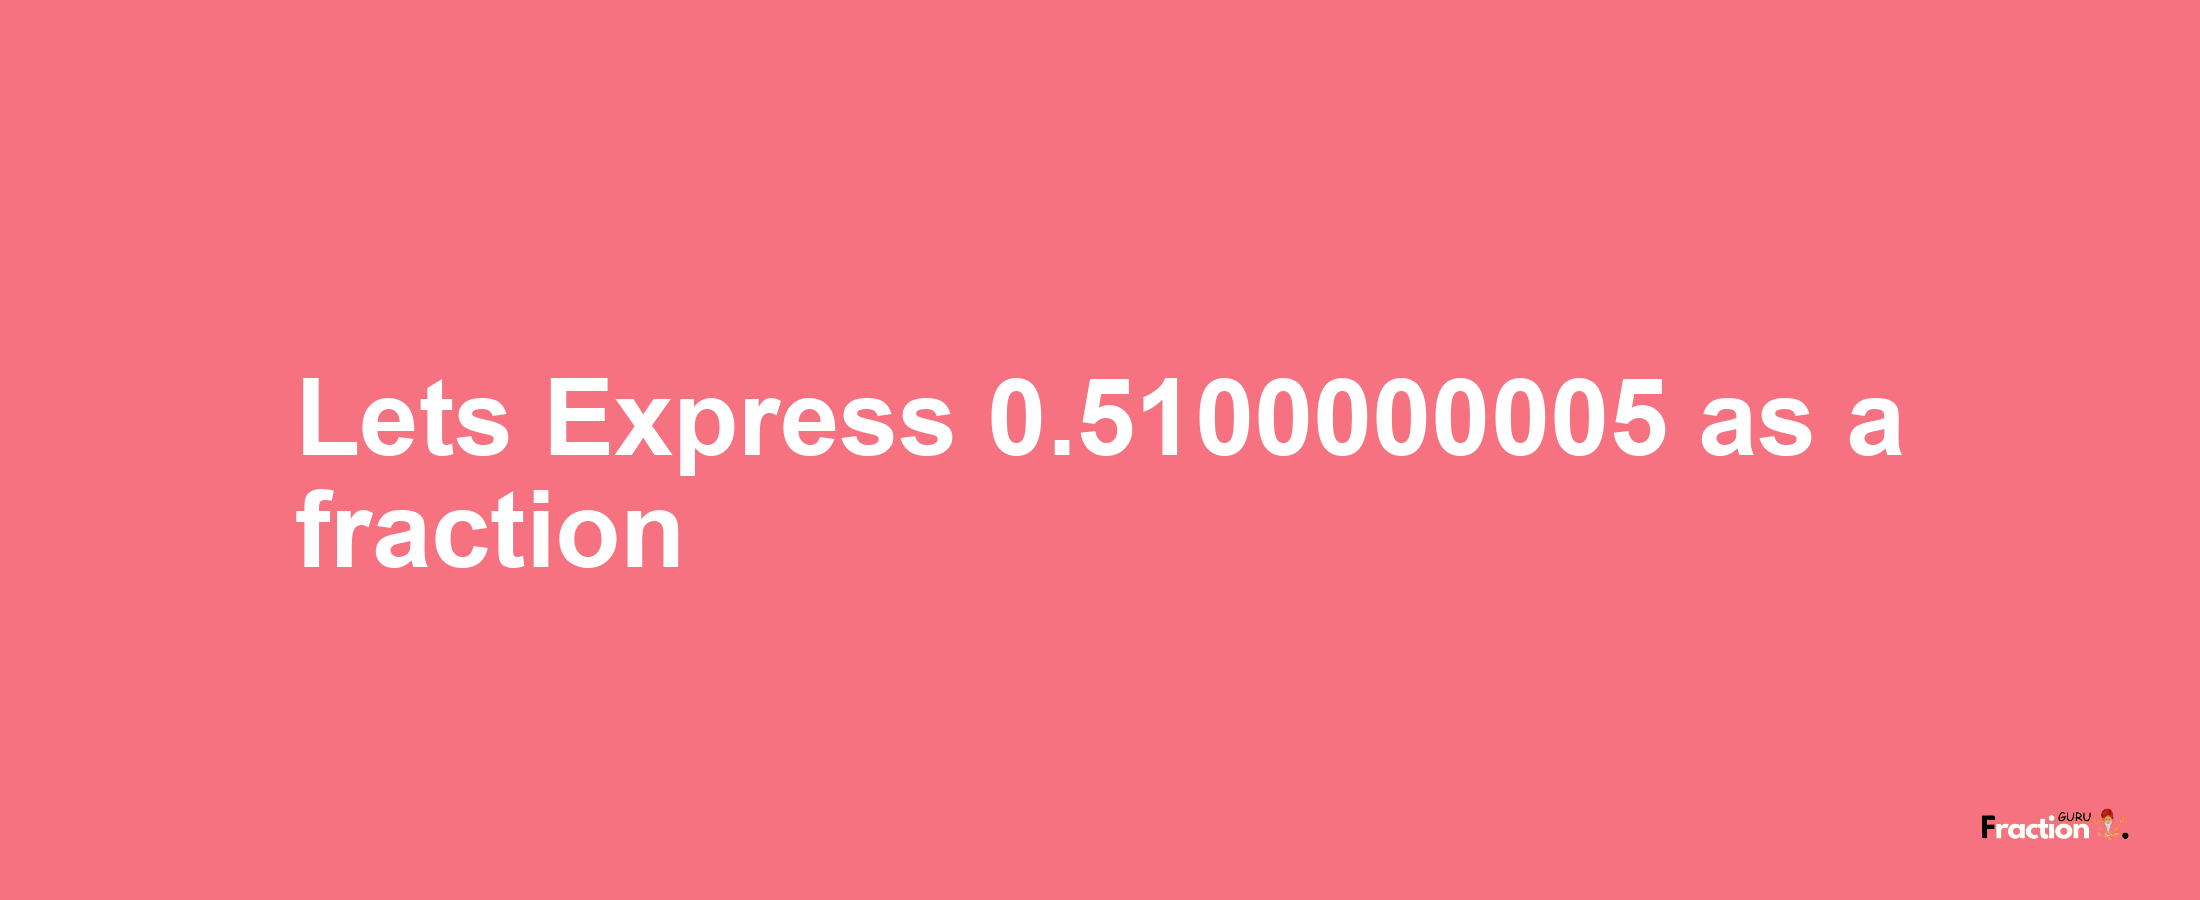 Lets Express 0.5100000005 as afraction